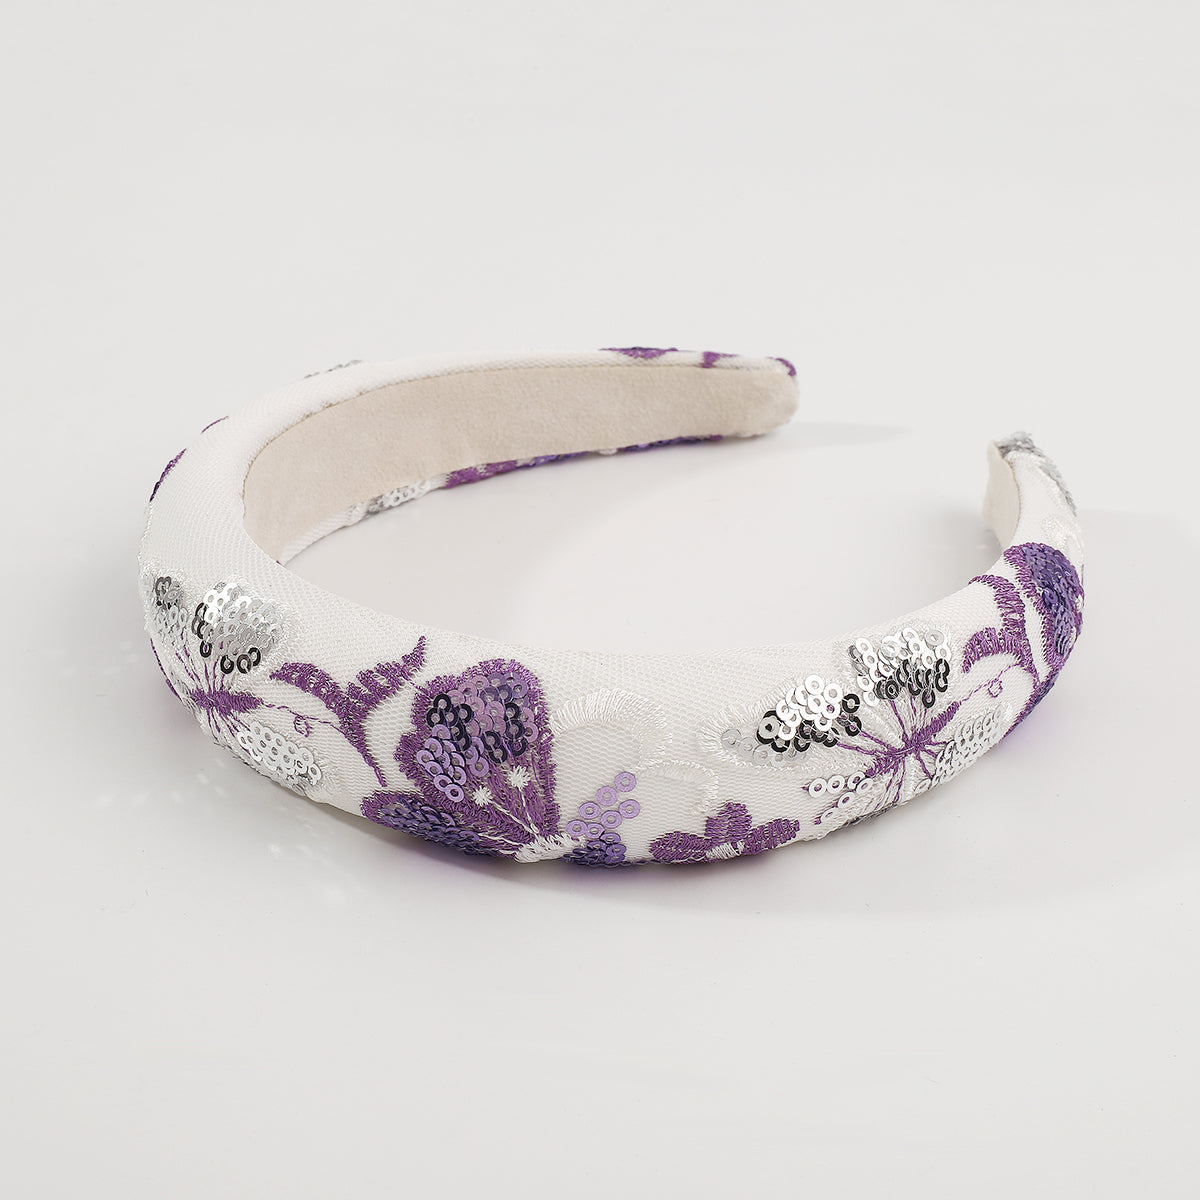 Embroidery w/ Sequins Embellished Padded Headband medyjewelry